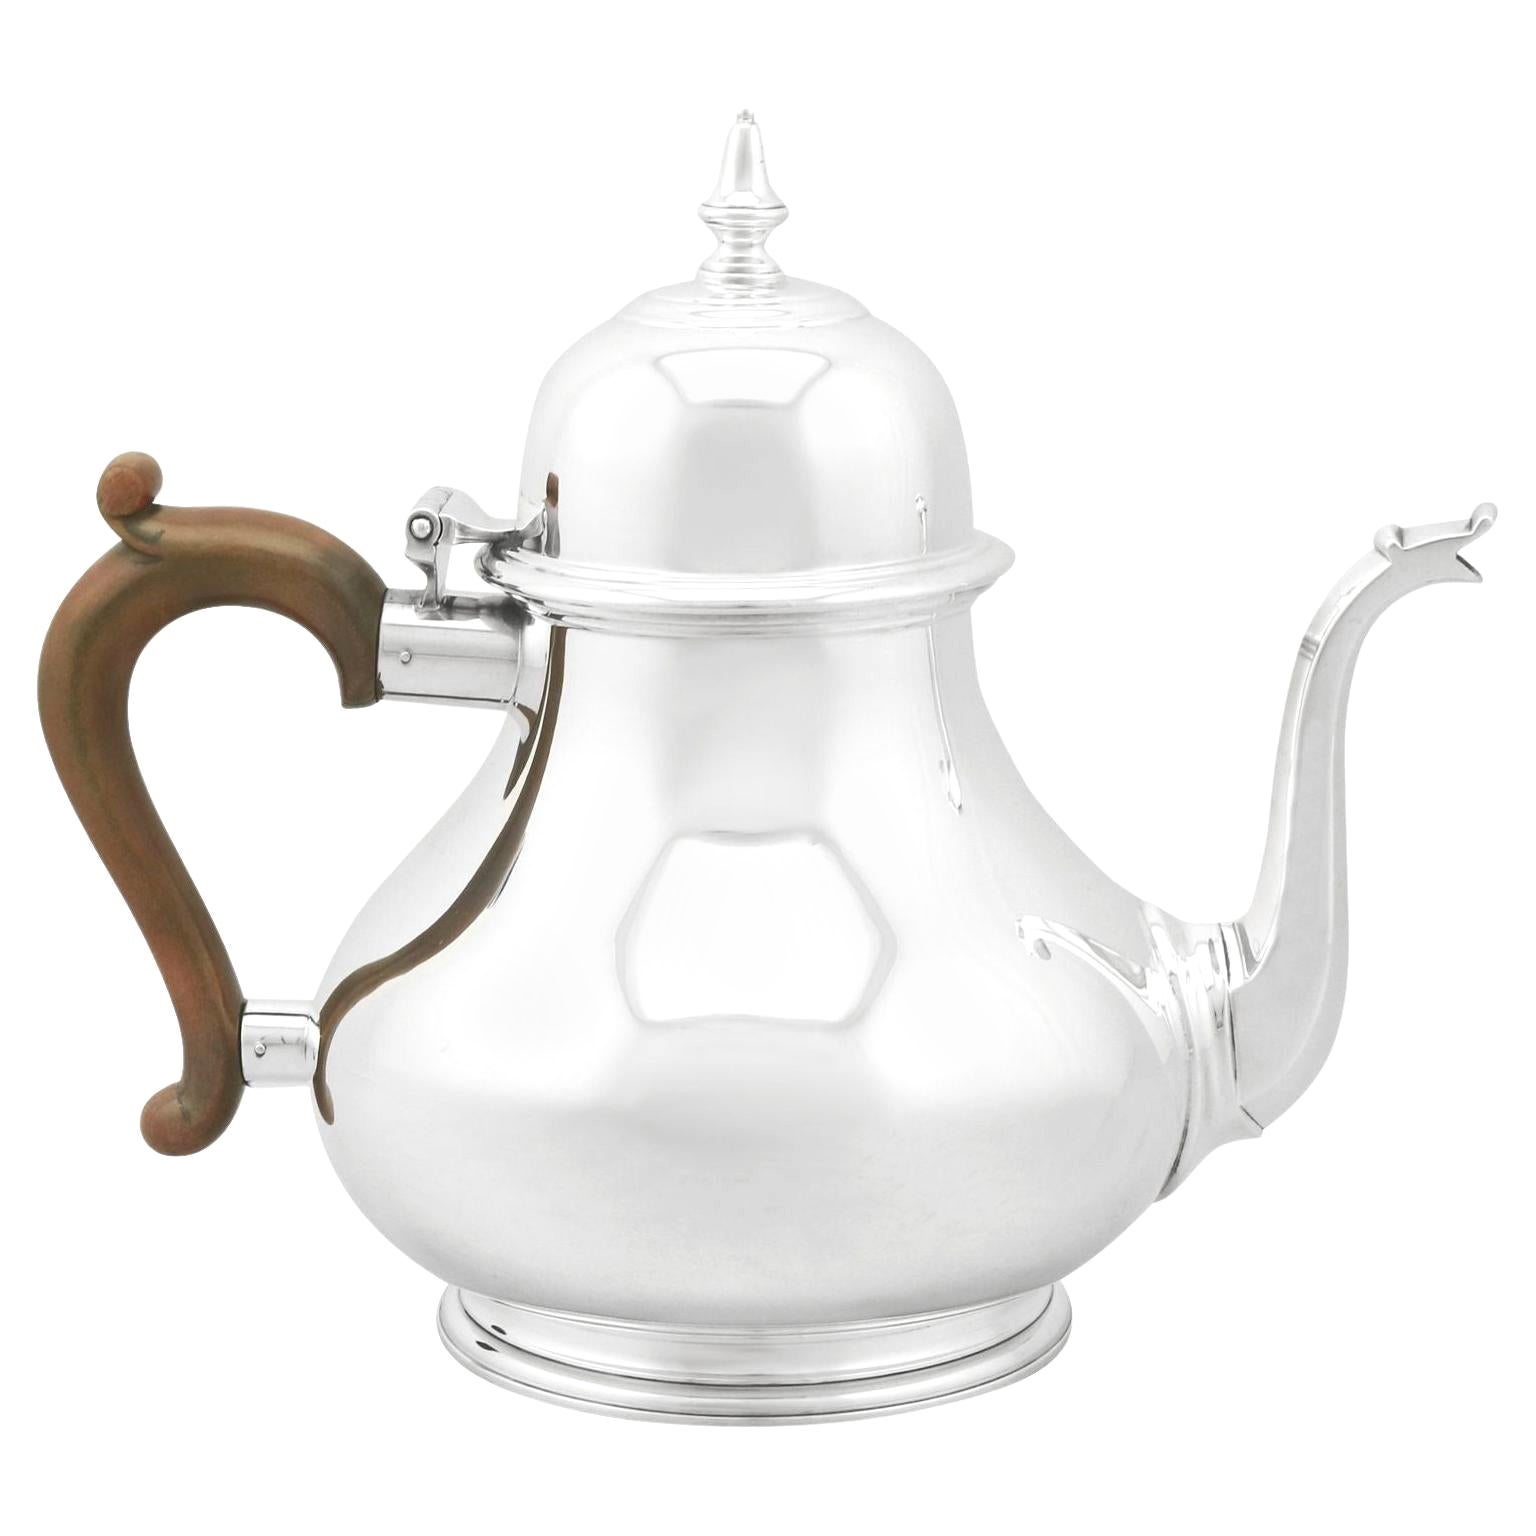 Richard Comyns 1970s Sterling Silver Teapot by William Comyns & Sons Ltd